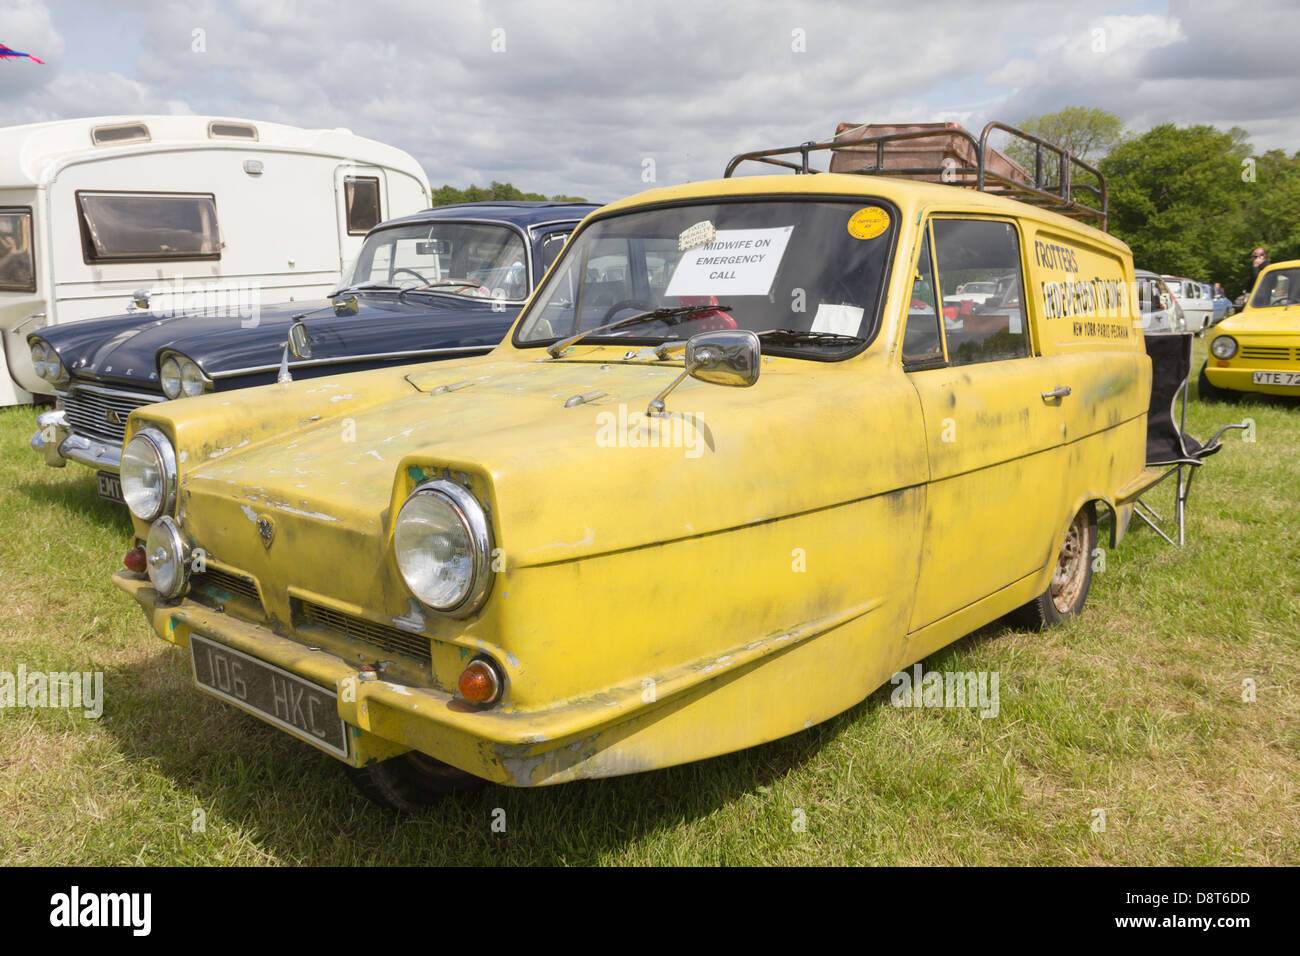 A yellow Reliant Regal Supervan in the guise of the vehicle owned by 'Del Boy' Trotter in the BBC comedy 'Only Fools and Horses' Stock Photo